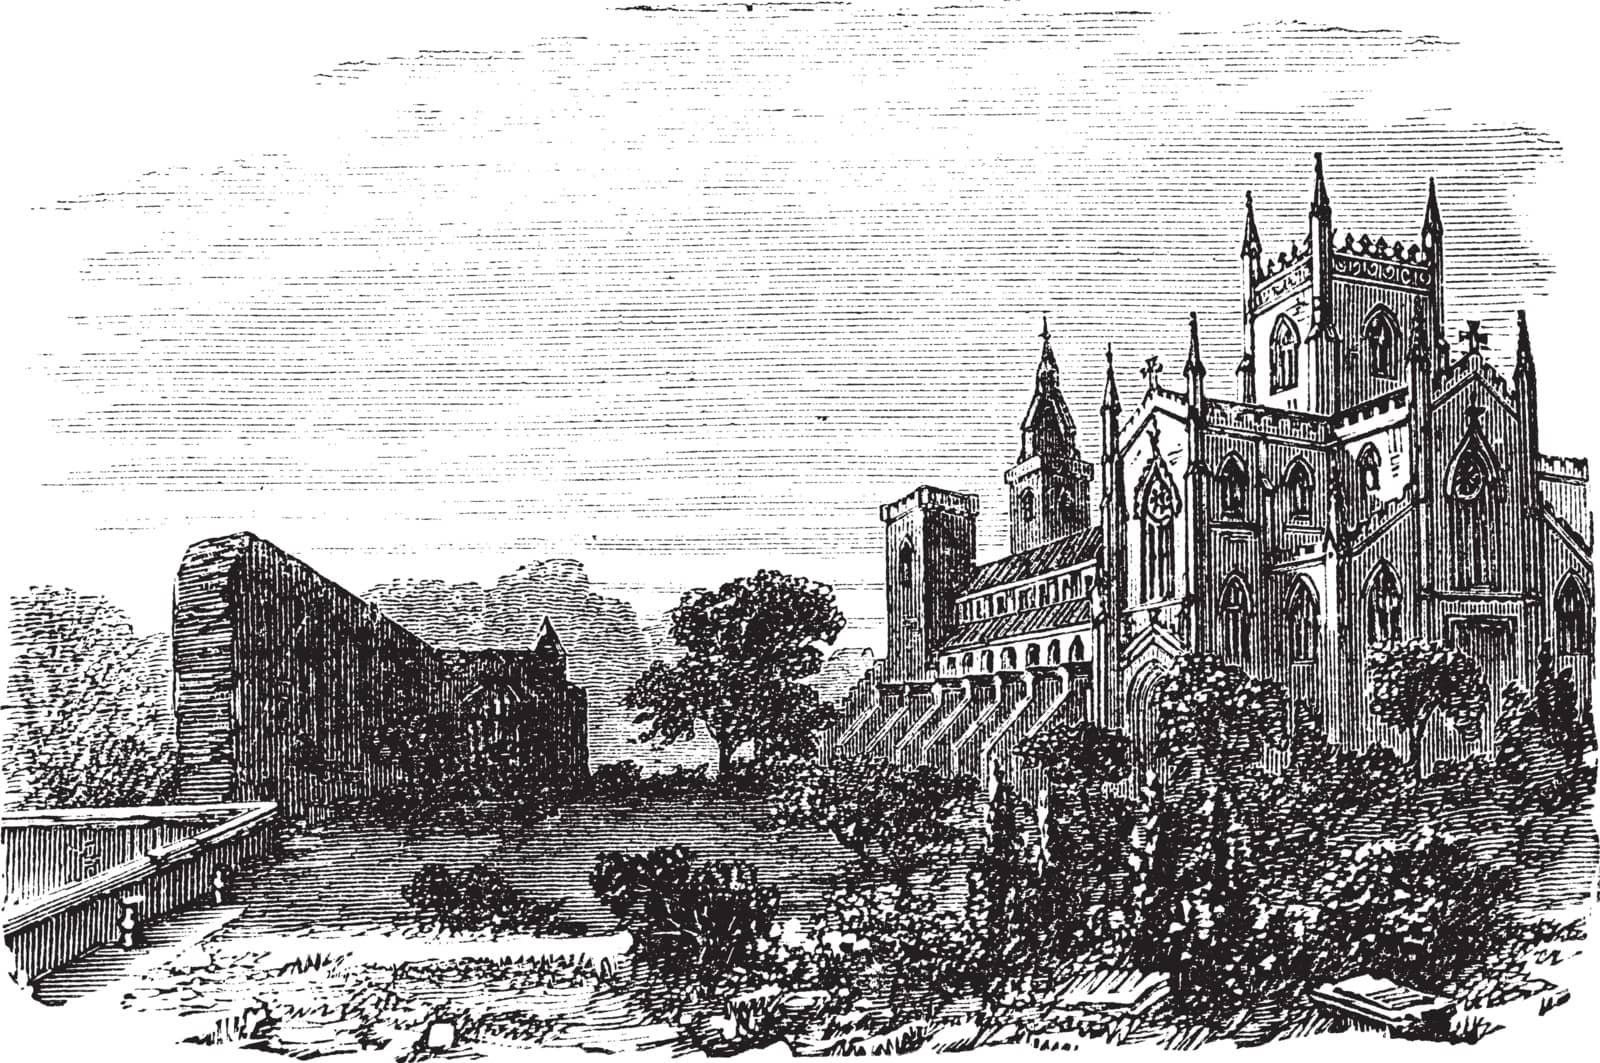 Dunfermline in Fife, Scotland, vintage engraving by Morphart